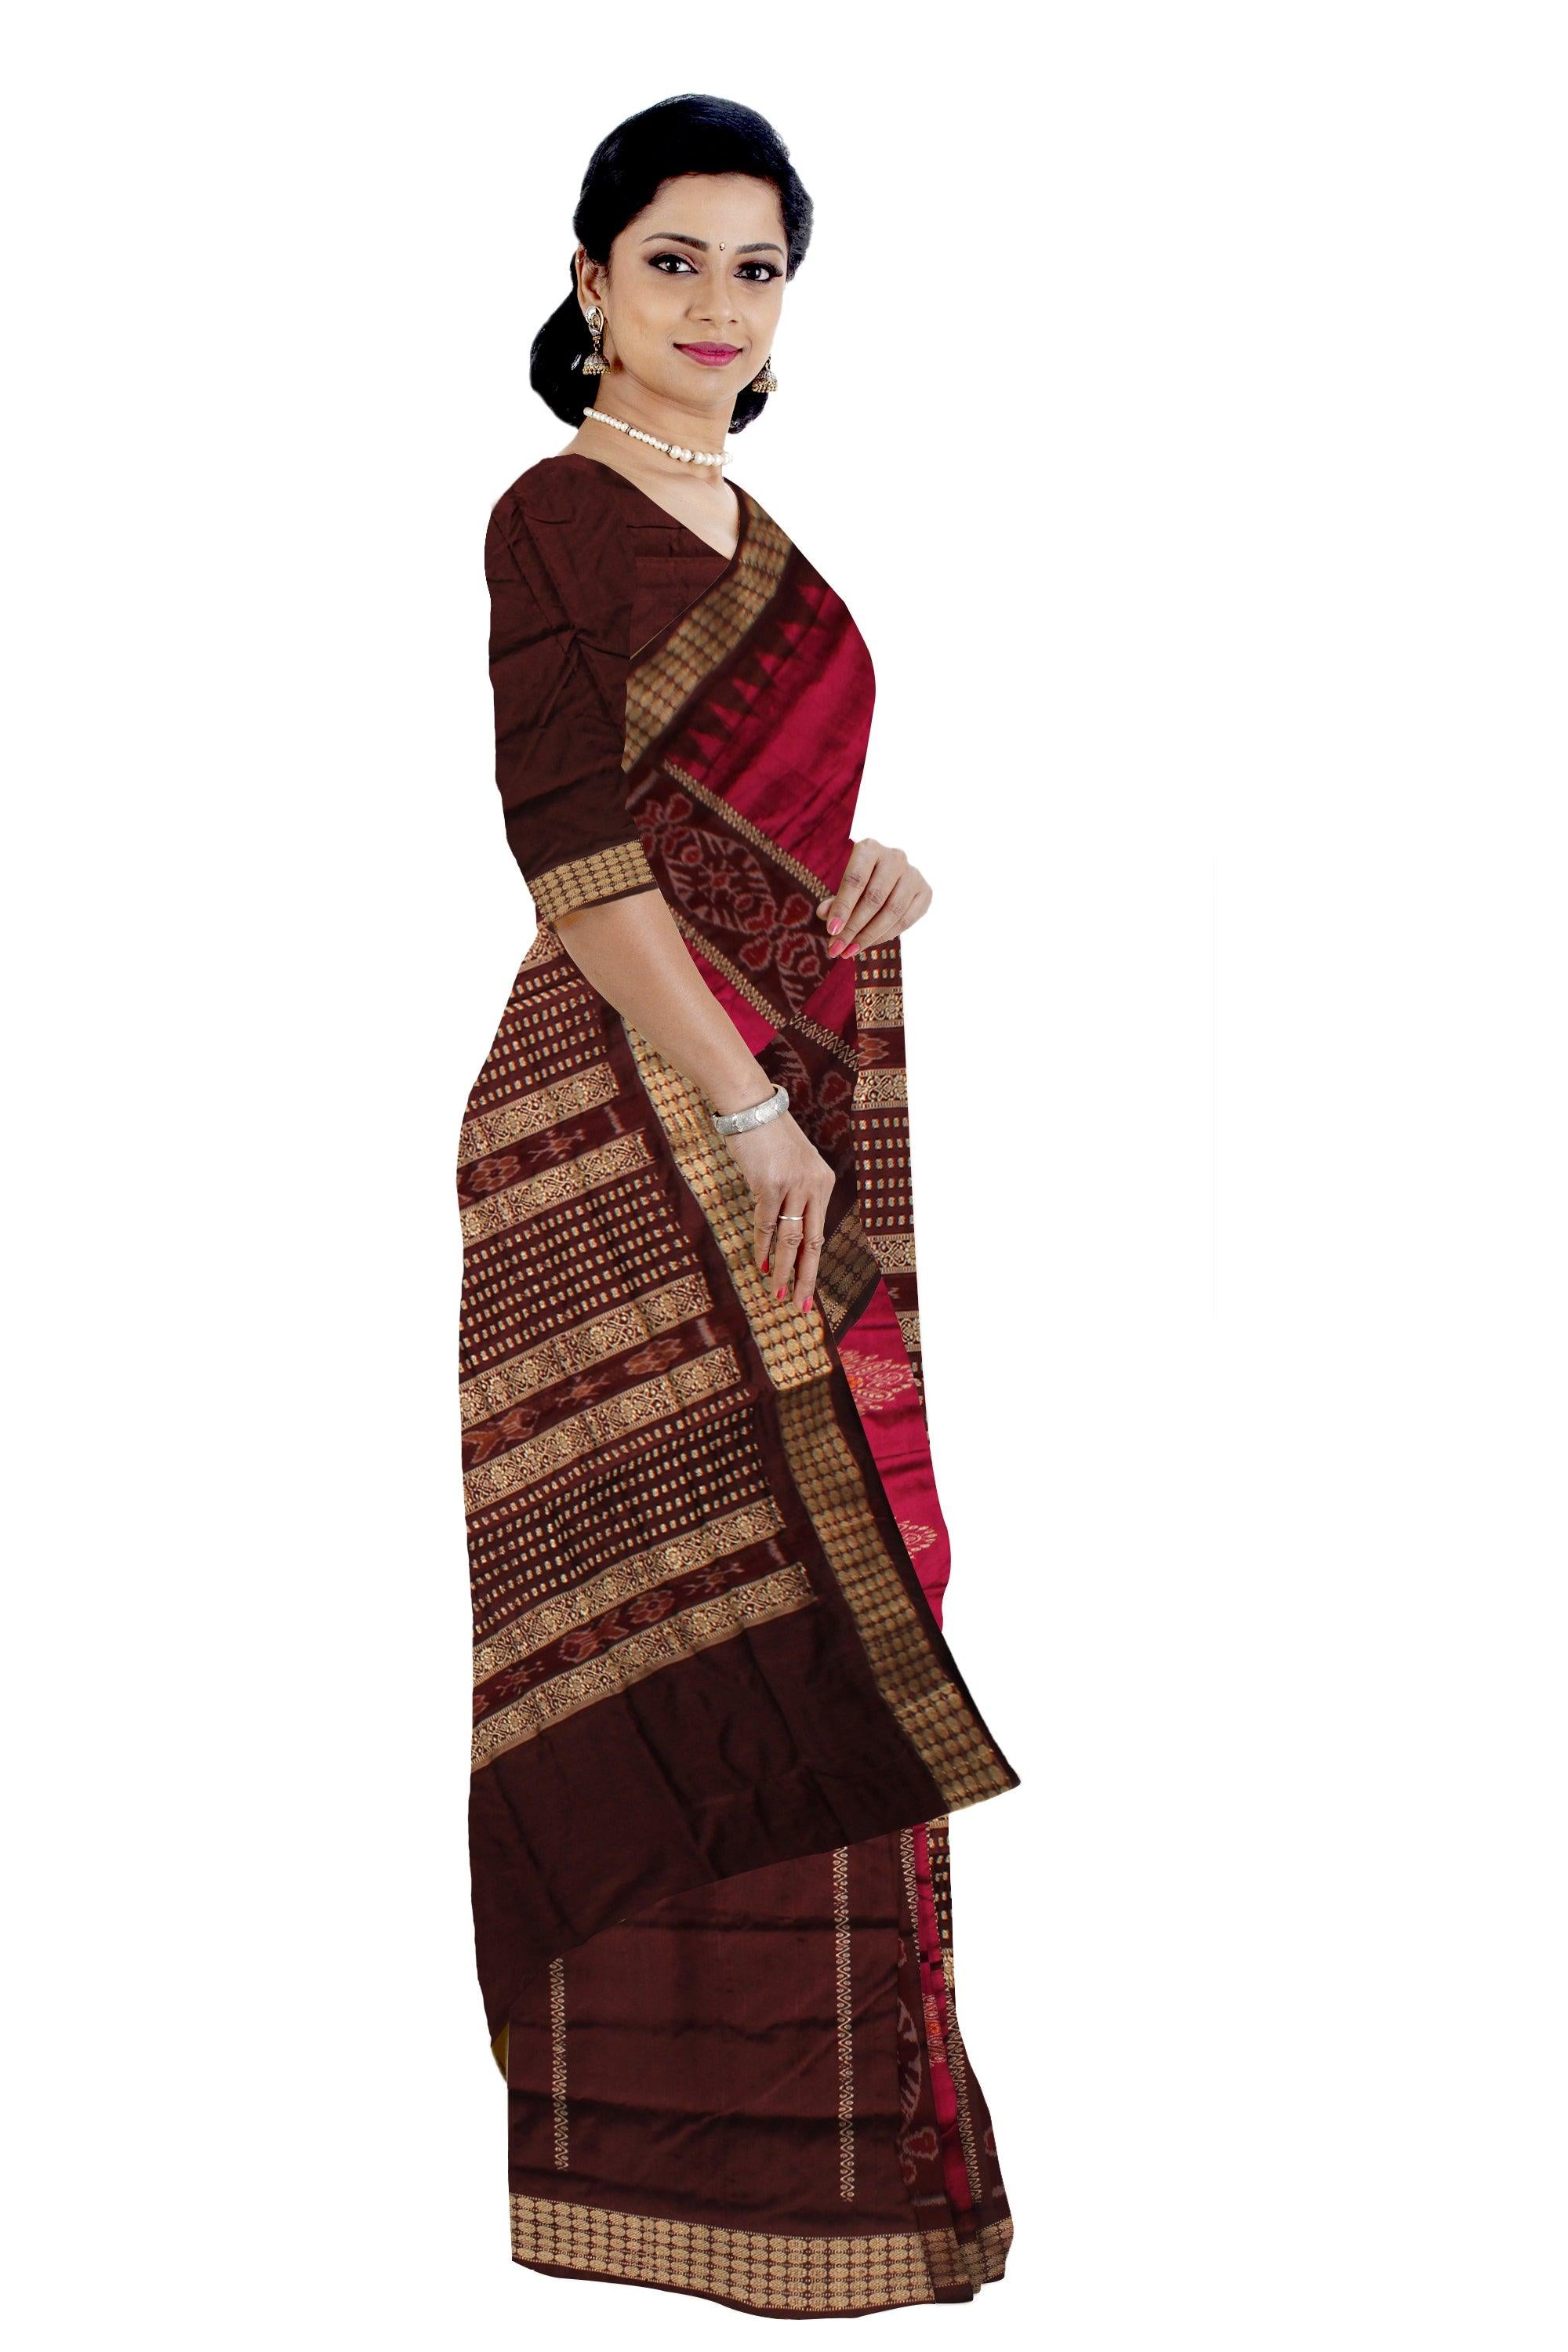 PINK AND COFFEE COLOR PATLI PATA SAREE , ATTACHED WITH BLOUSE PIECE. - Koshali Arts & Crafts Enterprise